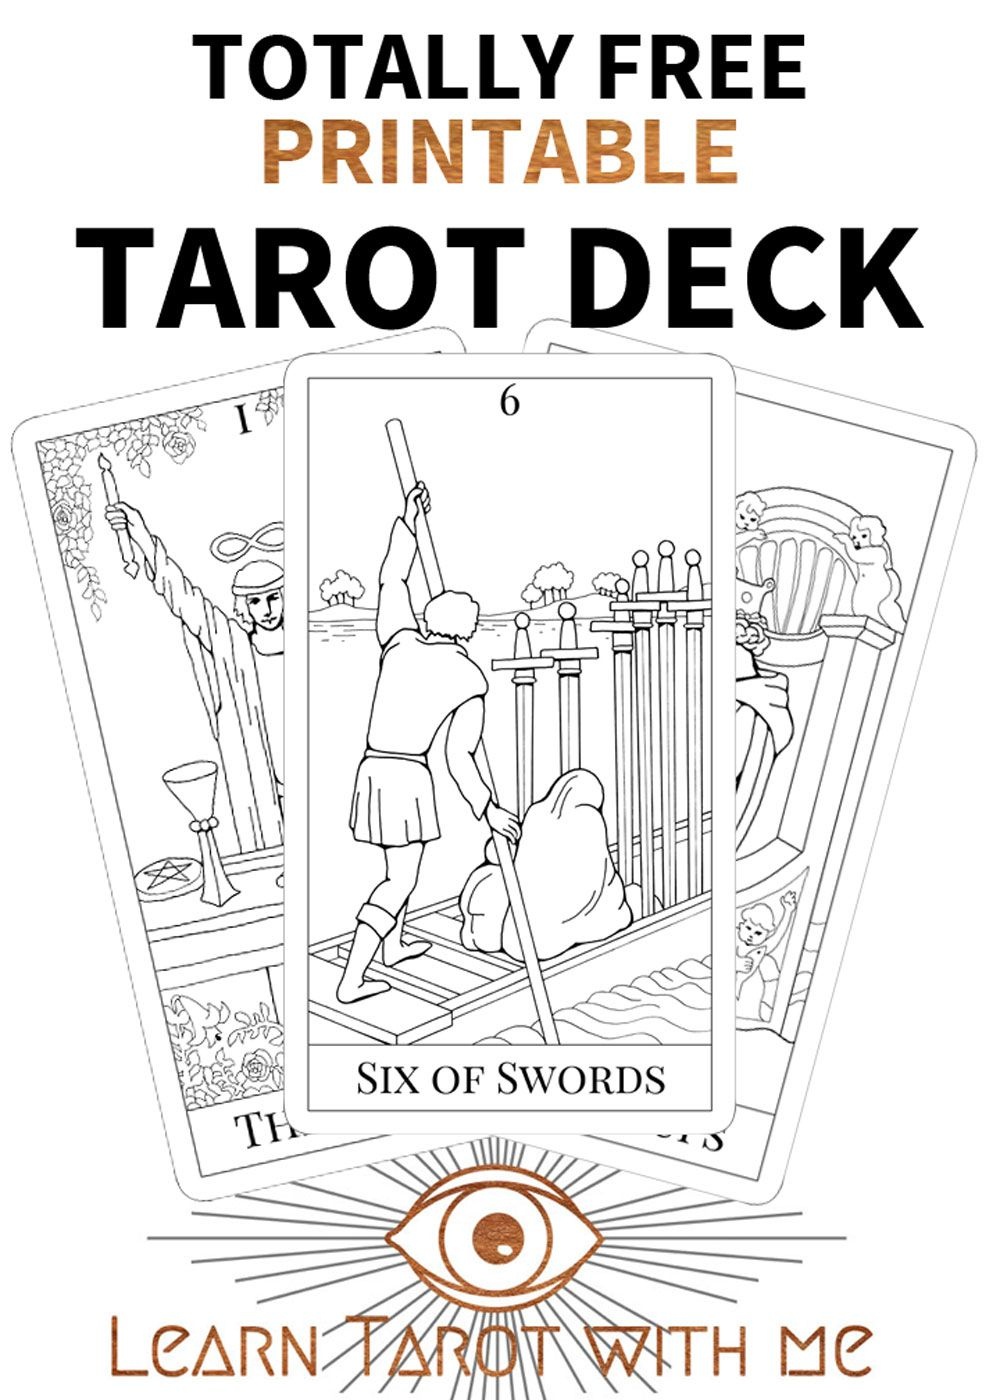 Printable Tarot Deck From | Learning Tarot | Free Tarot Cards, Tarot - Printable Tarot Cards Pdf Free